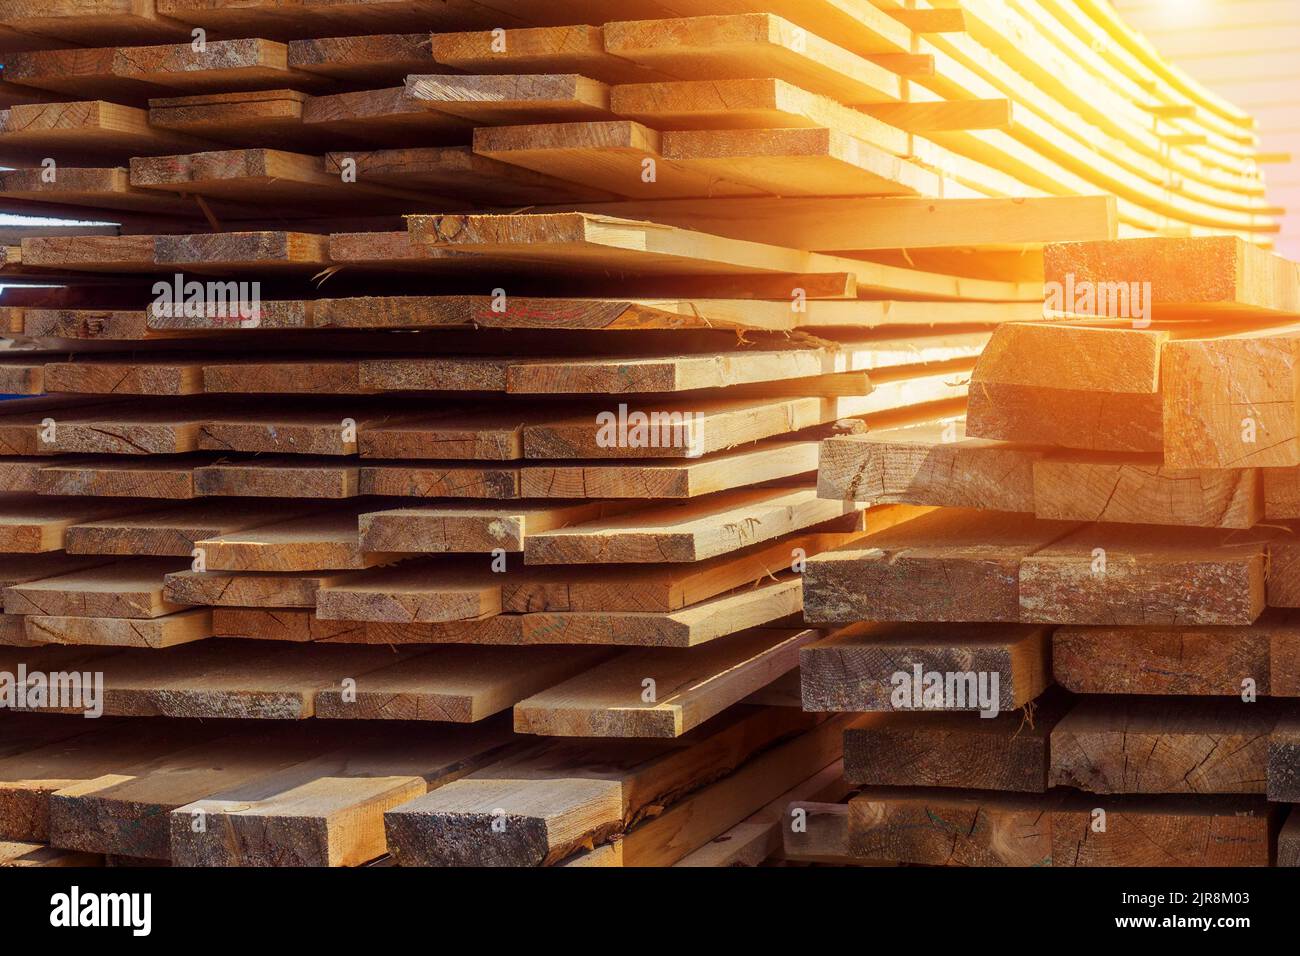 Wooden boards are stacked in a sawmill or carpentry shop. Sawing drying and marketing of wood. Industrial background Stock Photo